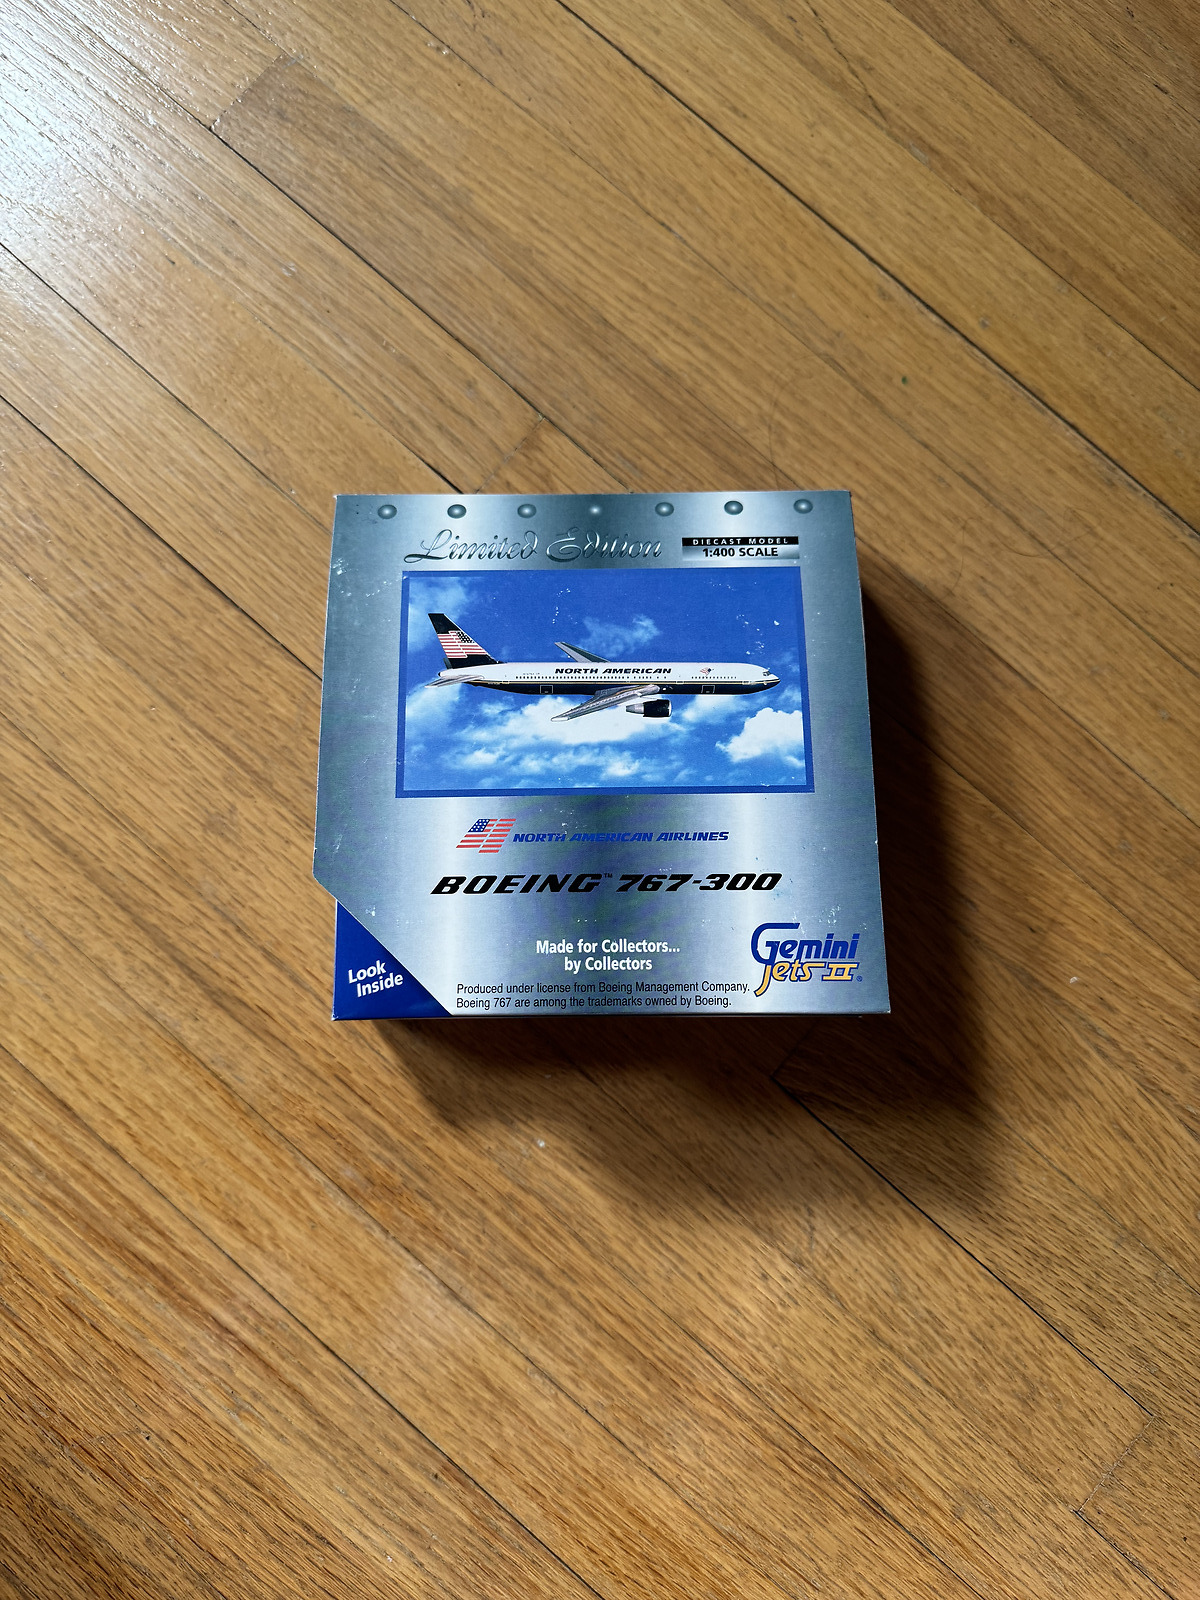 Gemini Jets 1:400 | North American Airlines Boeing 767-300 | Limited Edition